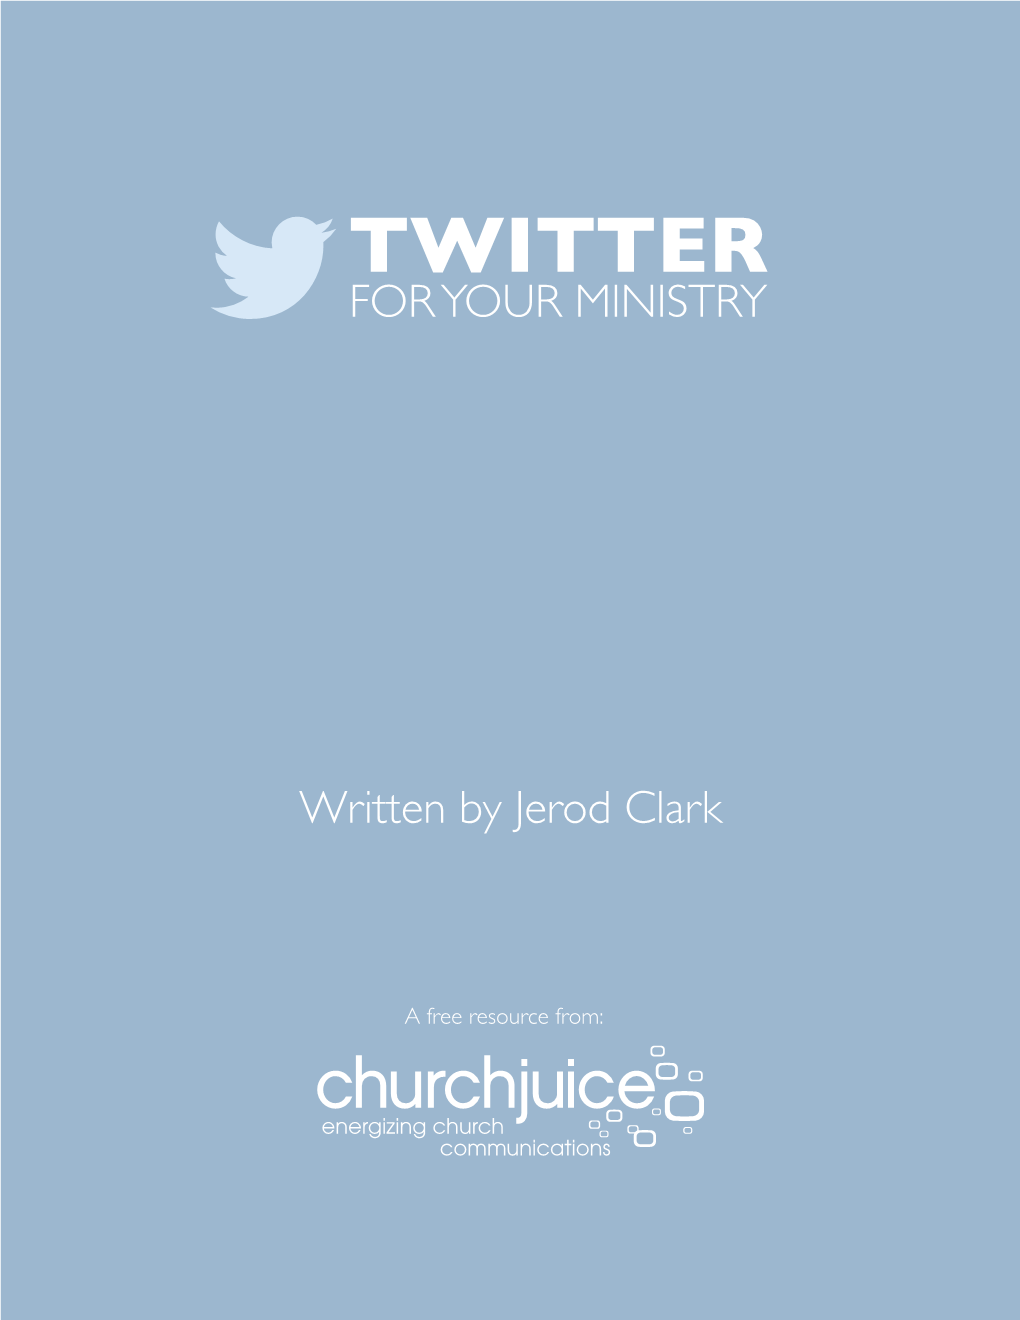 Twitter As a Ministry Tool